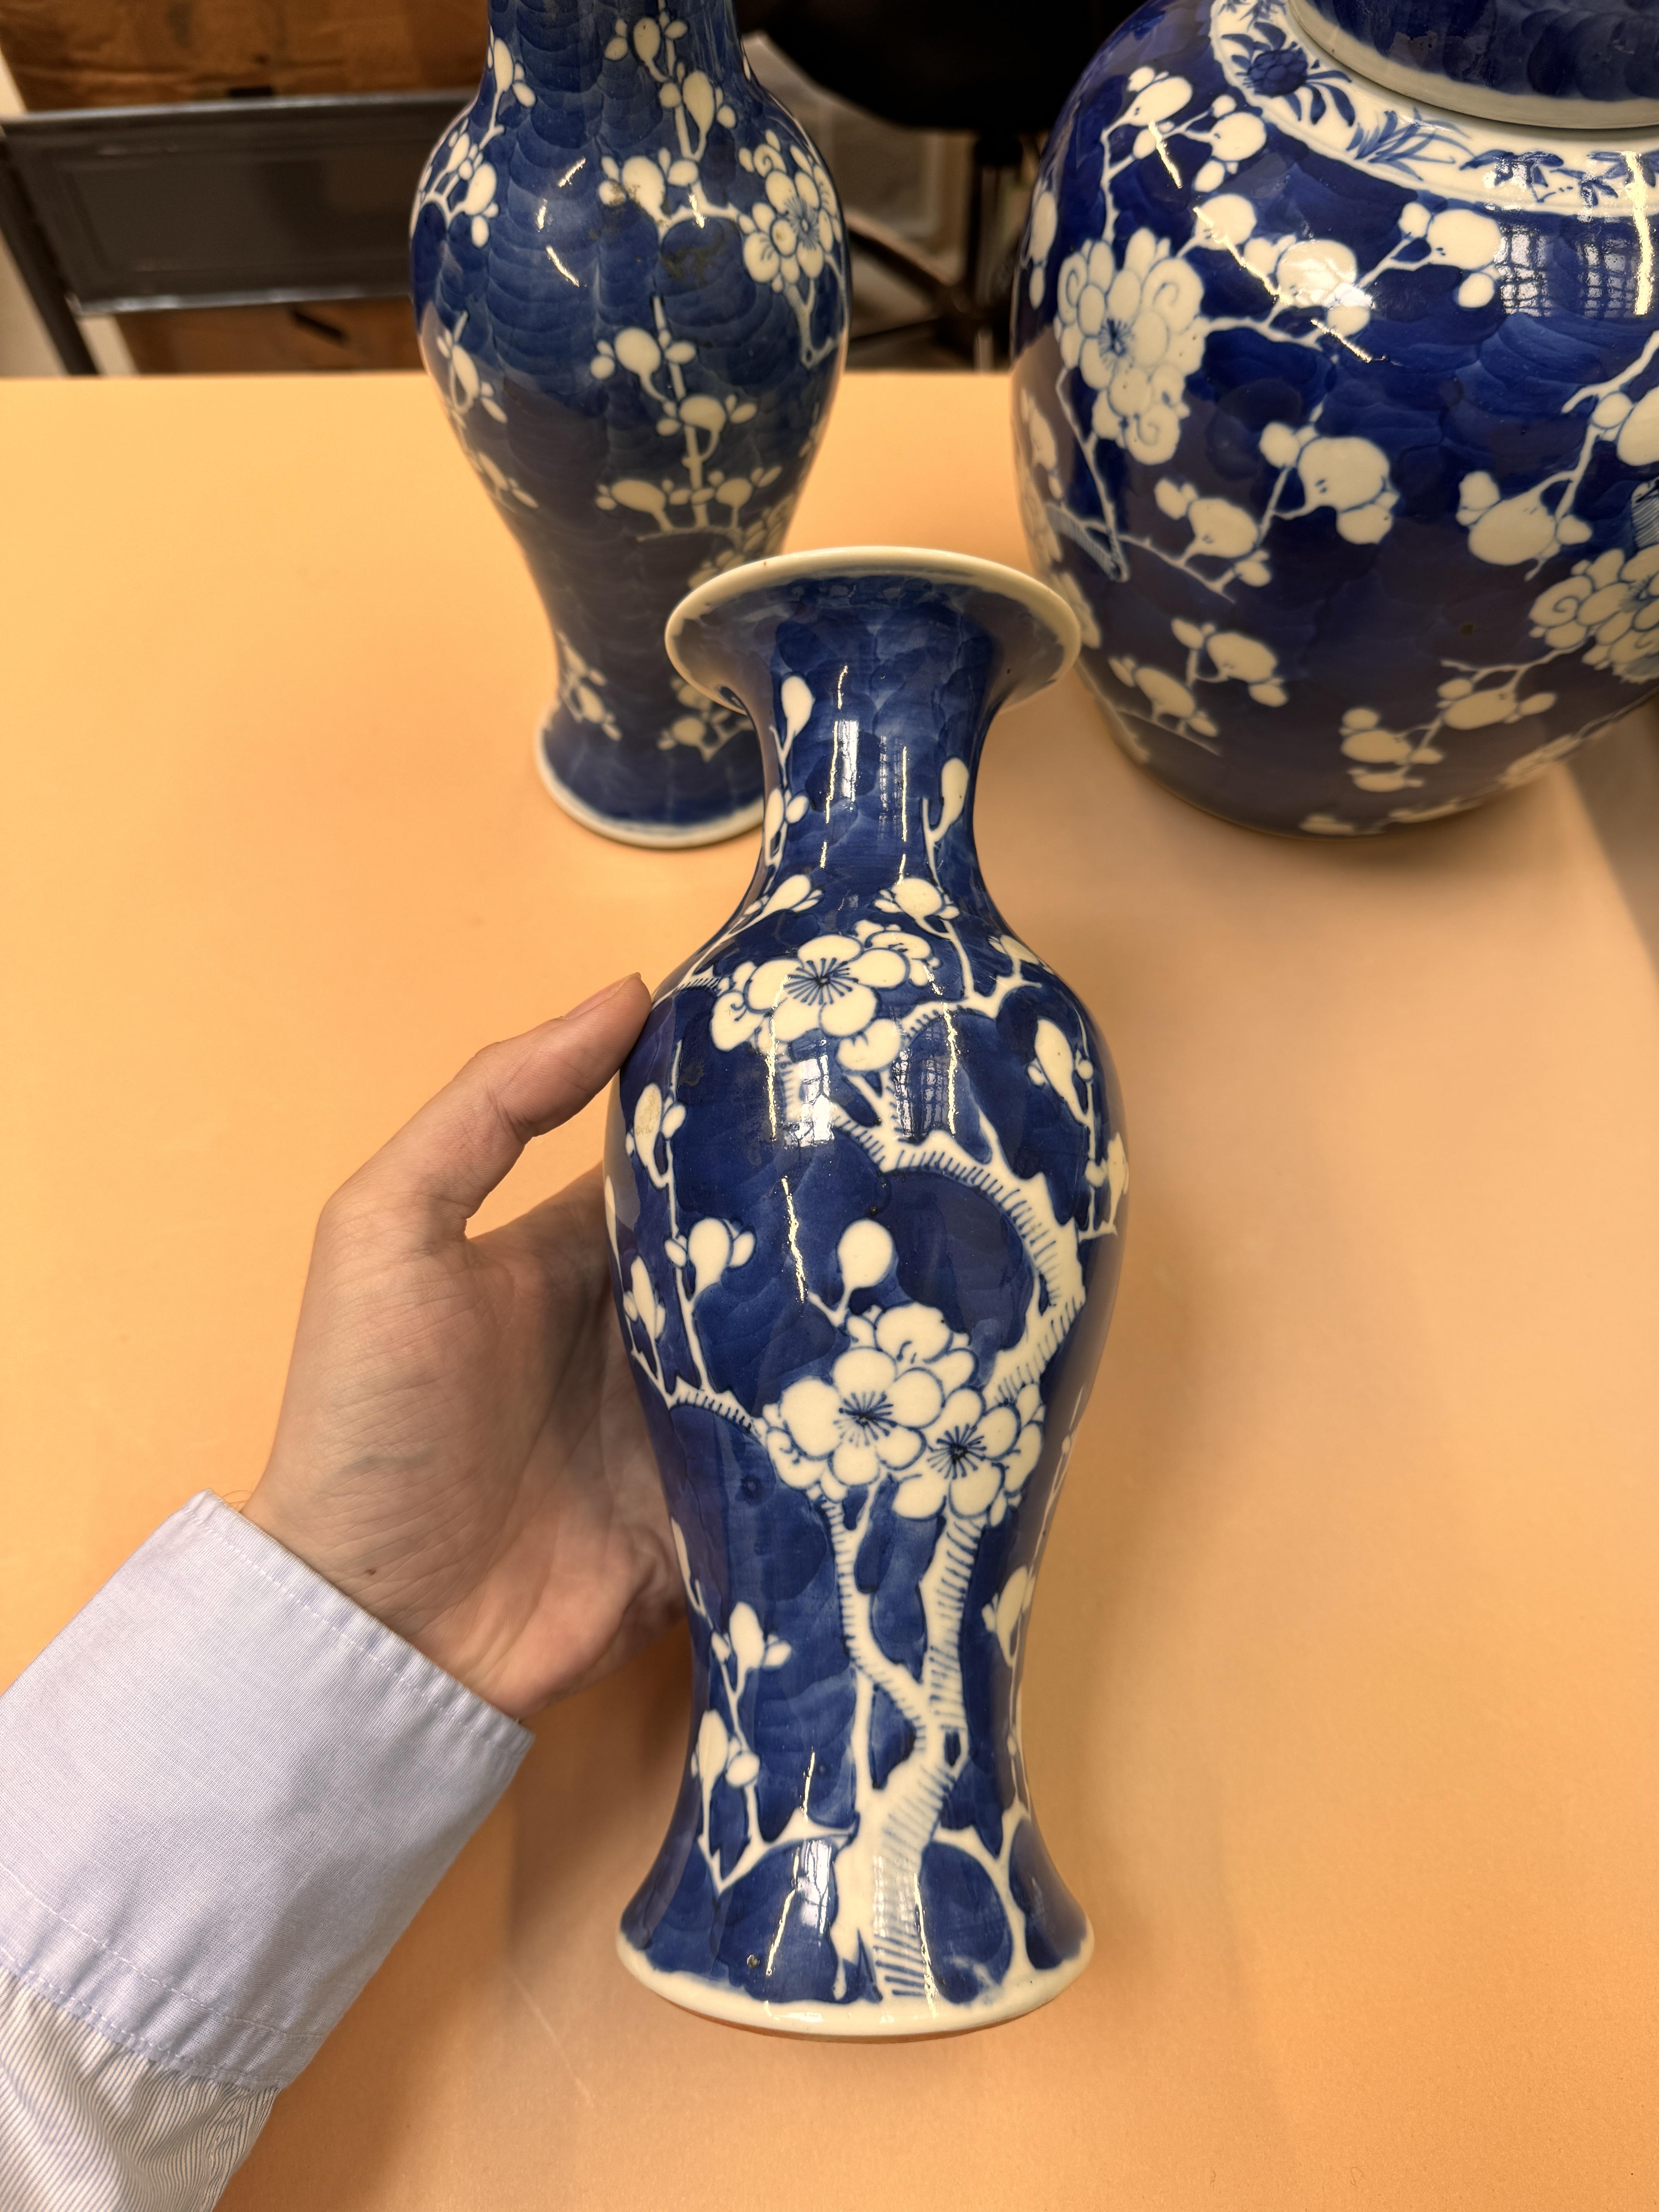 A CHINESE BLUE AND WHITE 'PRUNUS' JAR AND TWO VASES 清十九世紀 青花梅紋罐及瓶兩件 - Image 5 of 33